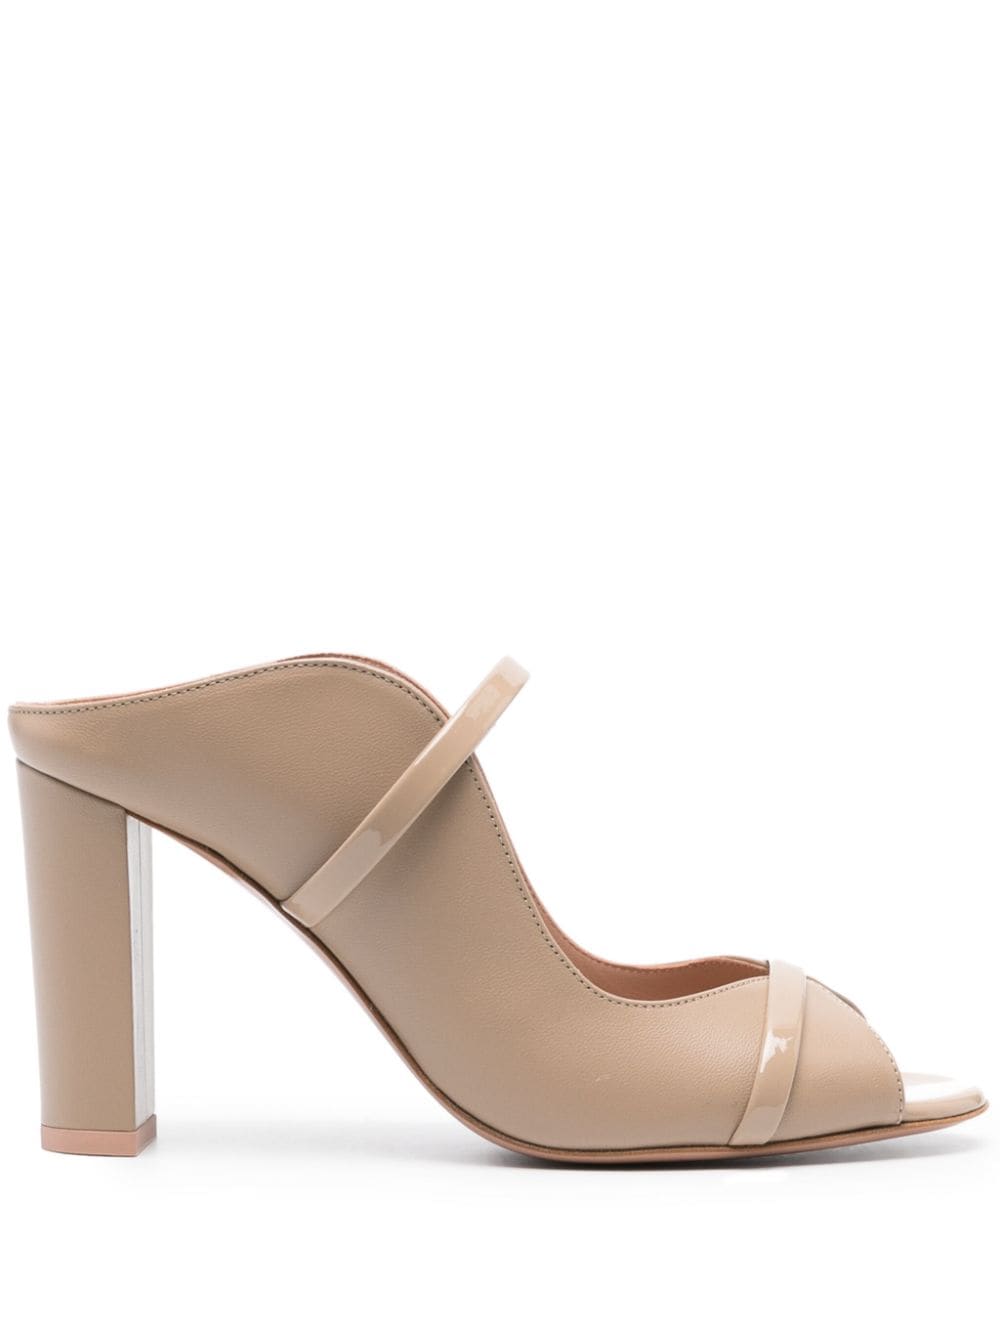 Malone Souliers Norah 85mm leather mules - Neutrals von Malone Souliers